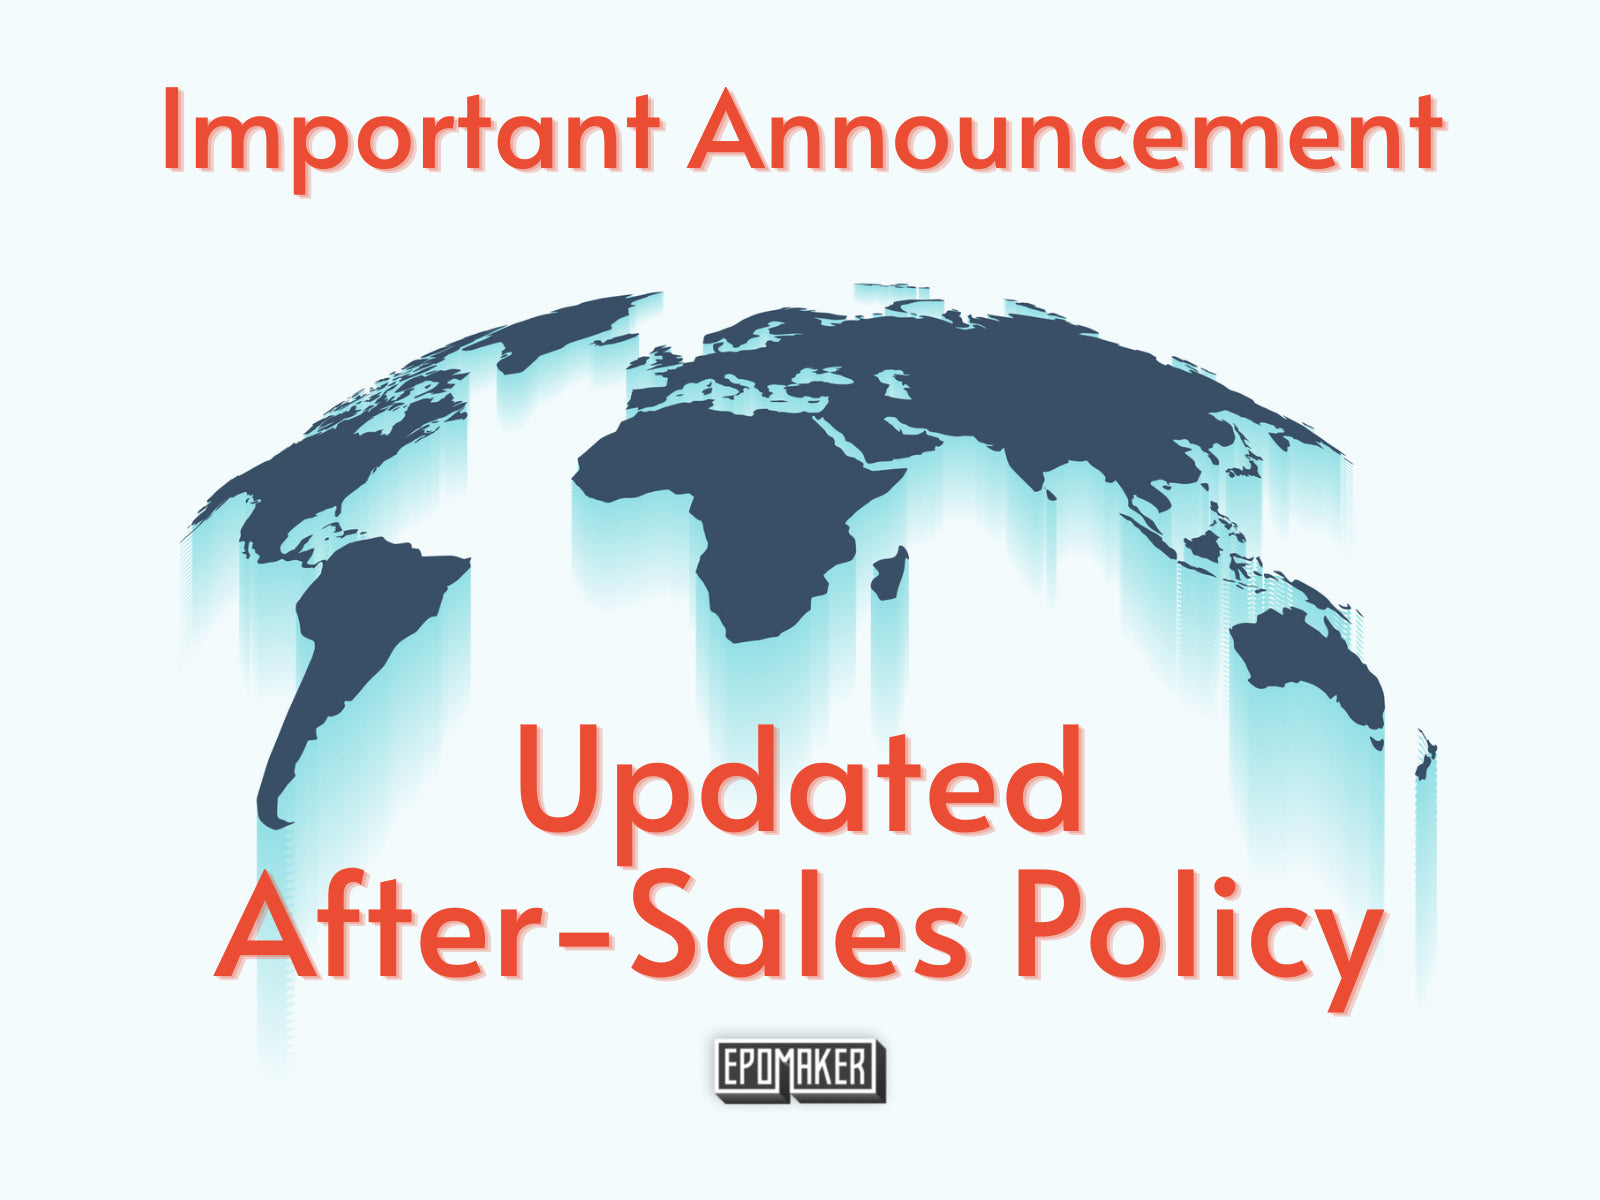 Updated After-Sales Policy